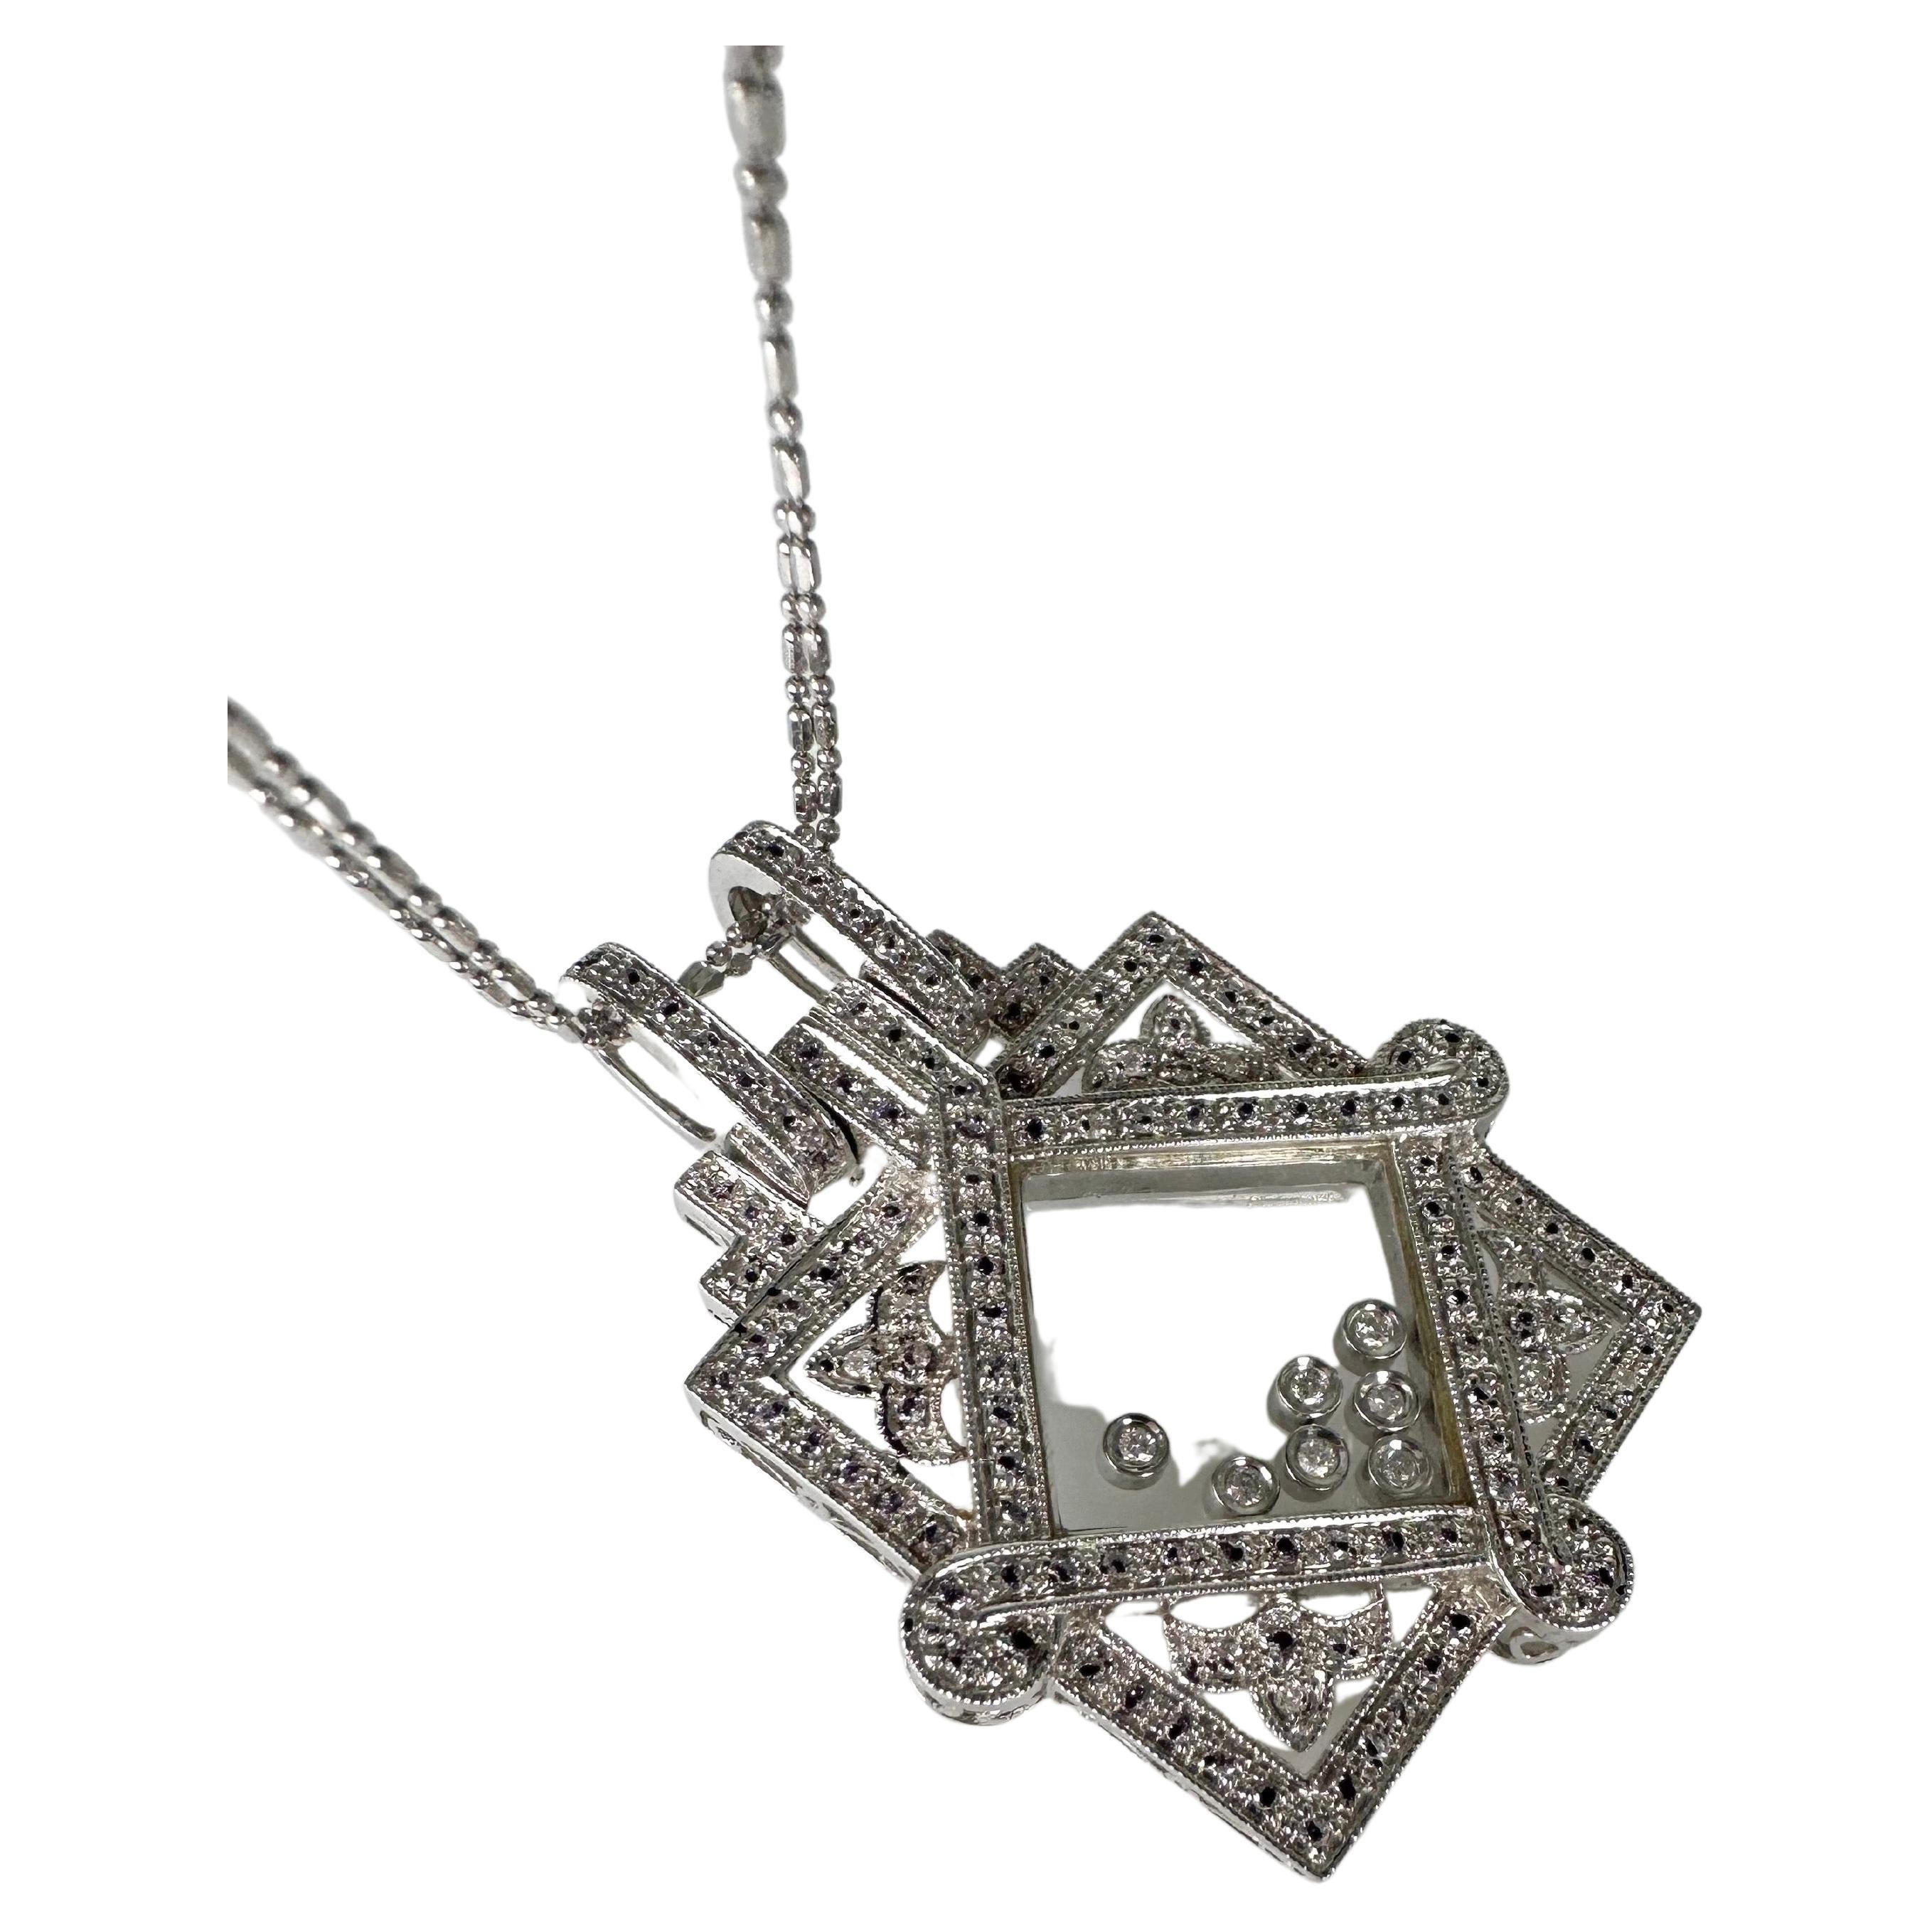 Beautiful diamonds pendant necklace, floating diamonds under the glass and long chain at 23